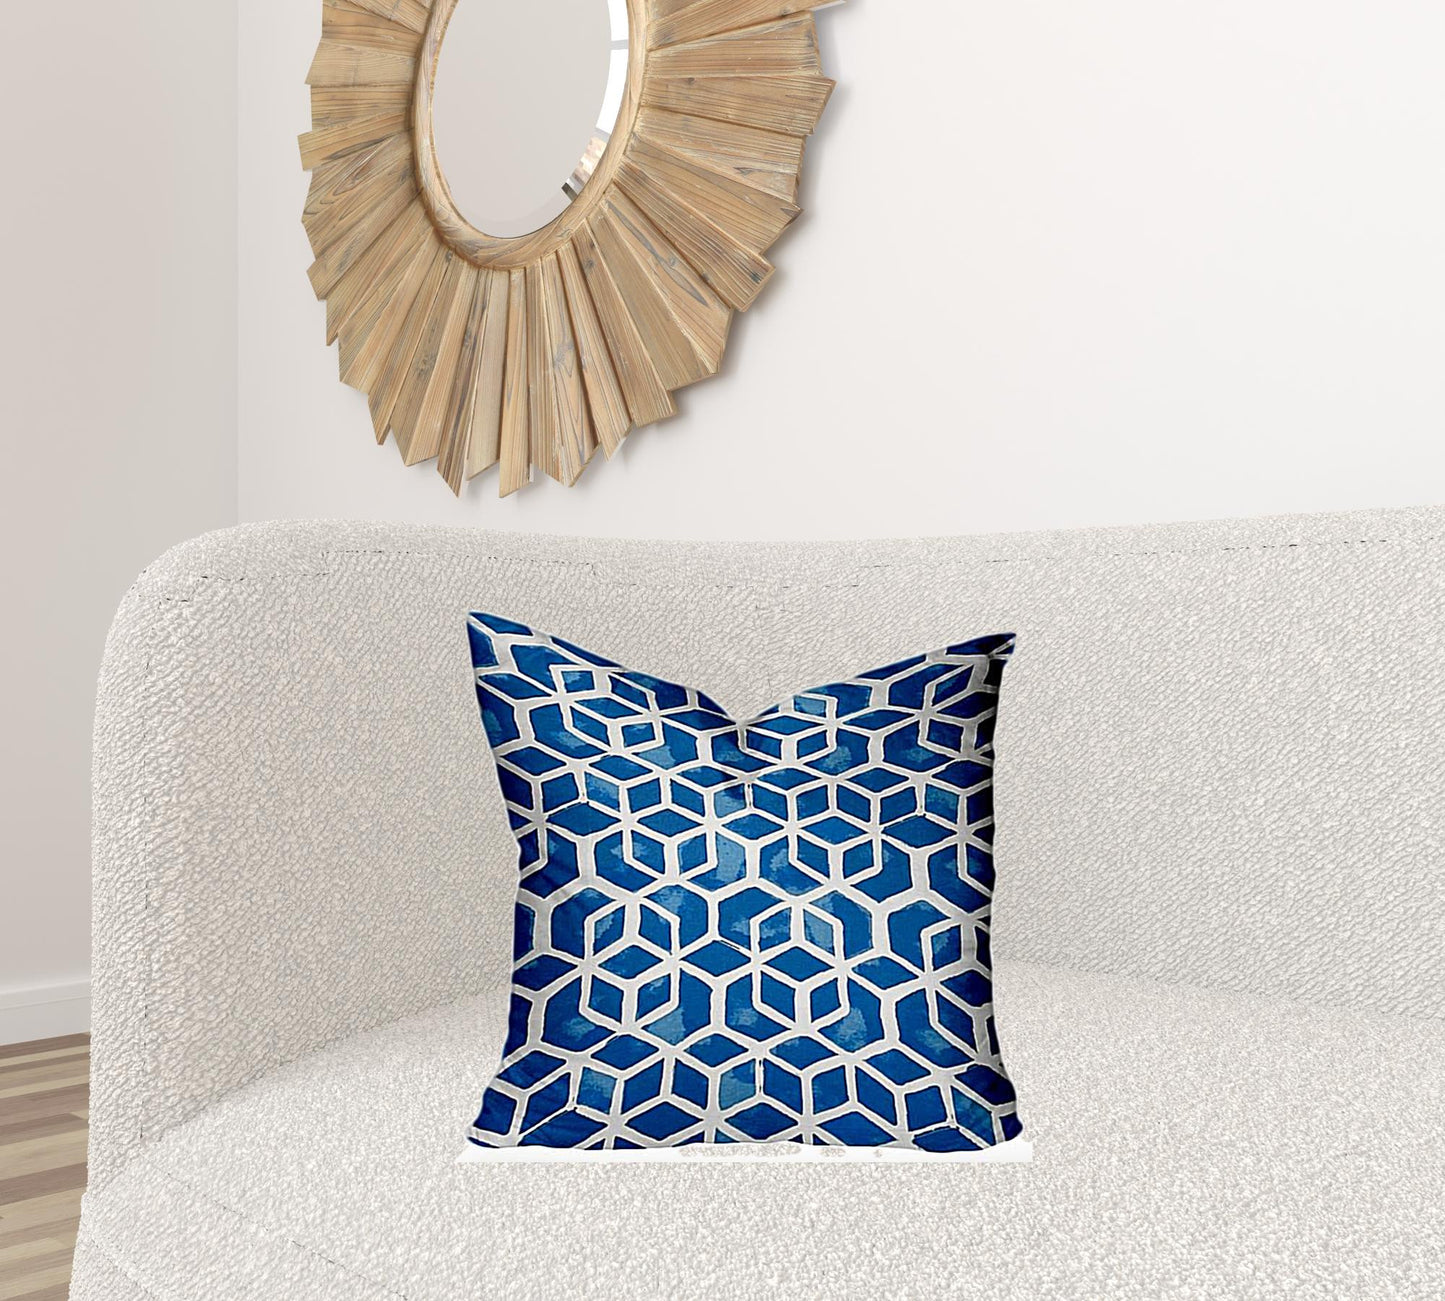 20" X 20" Blue And White Enveloped Geometric Throw Indoor Outdoor Pillow